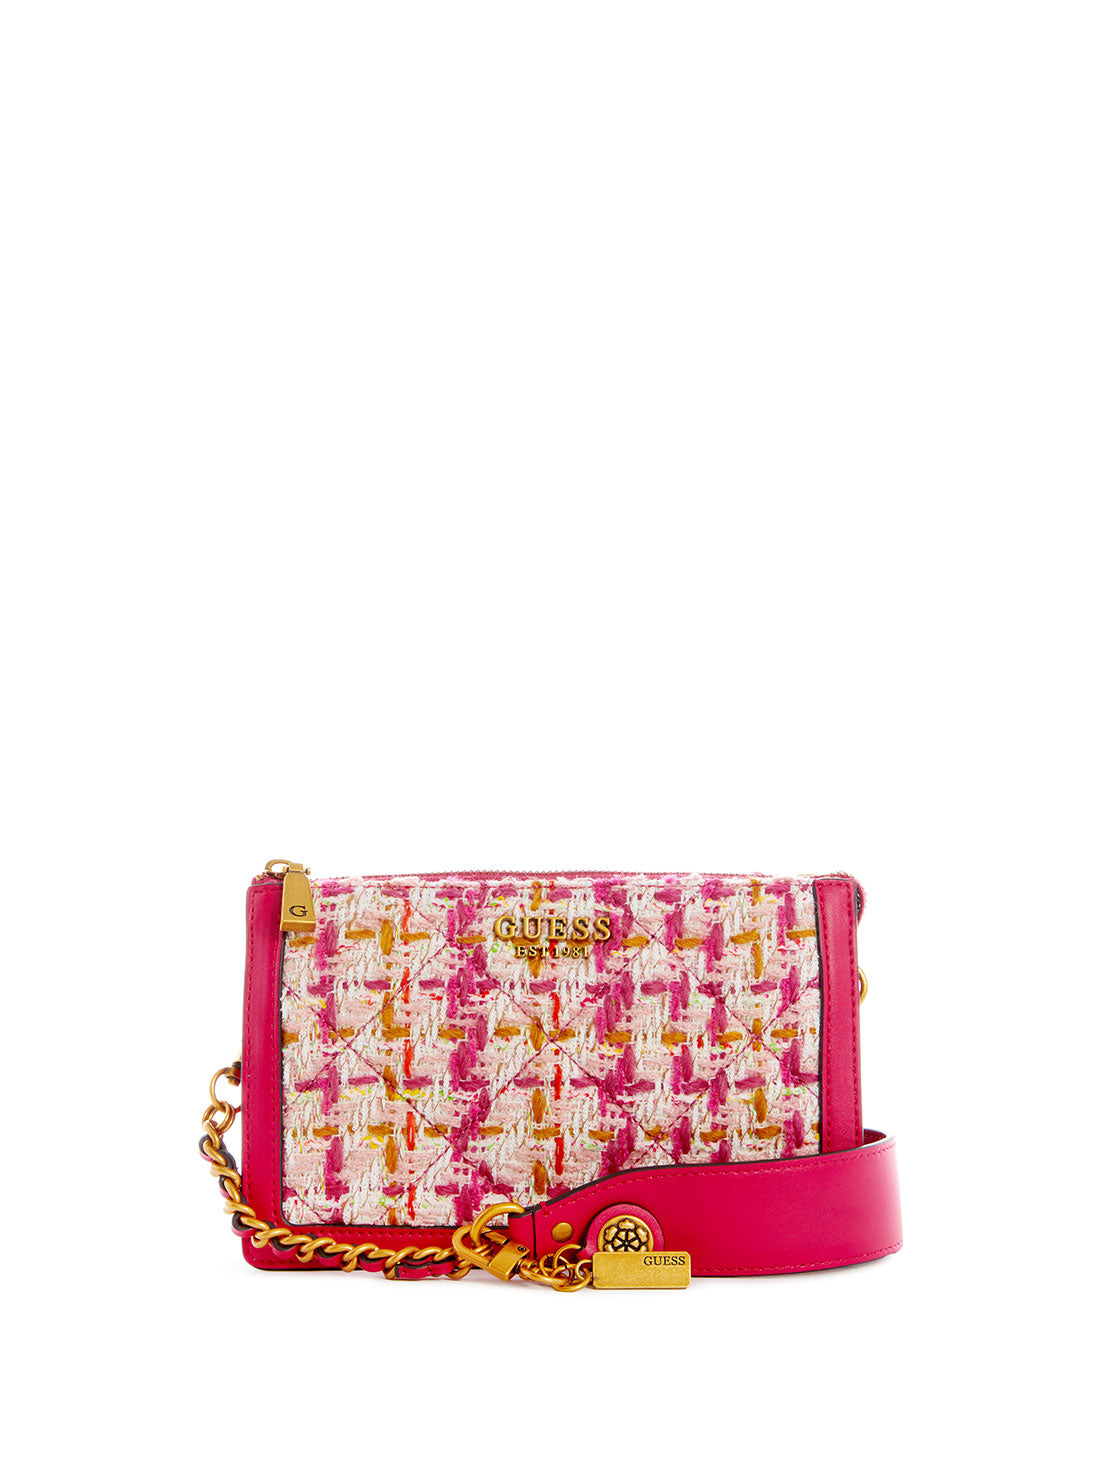 GUESS Womens Hot Pink Abey Multi Compartment Shoulder Bag TH855872 Front View